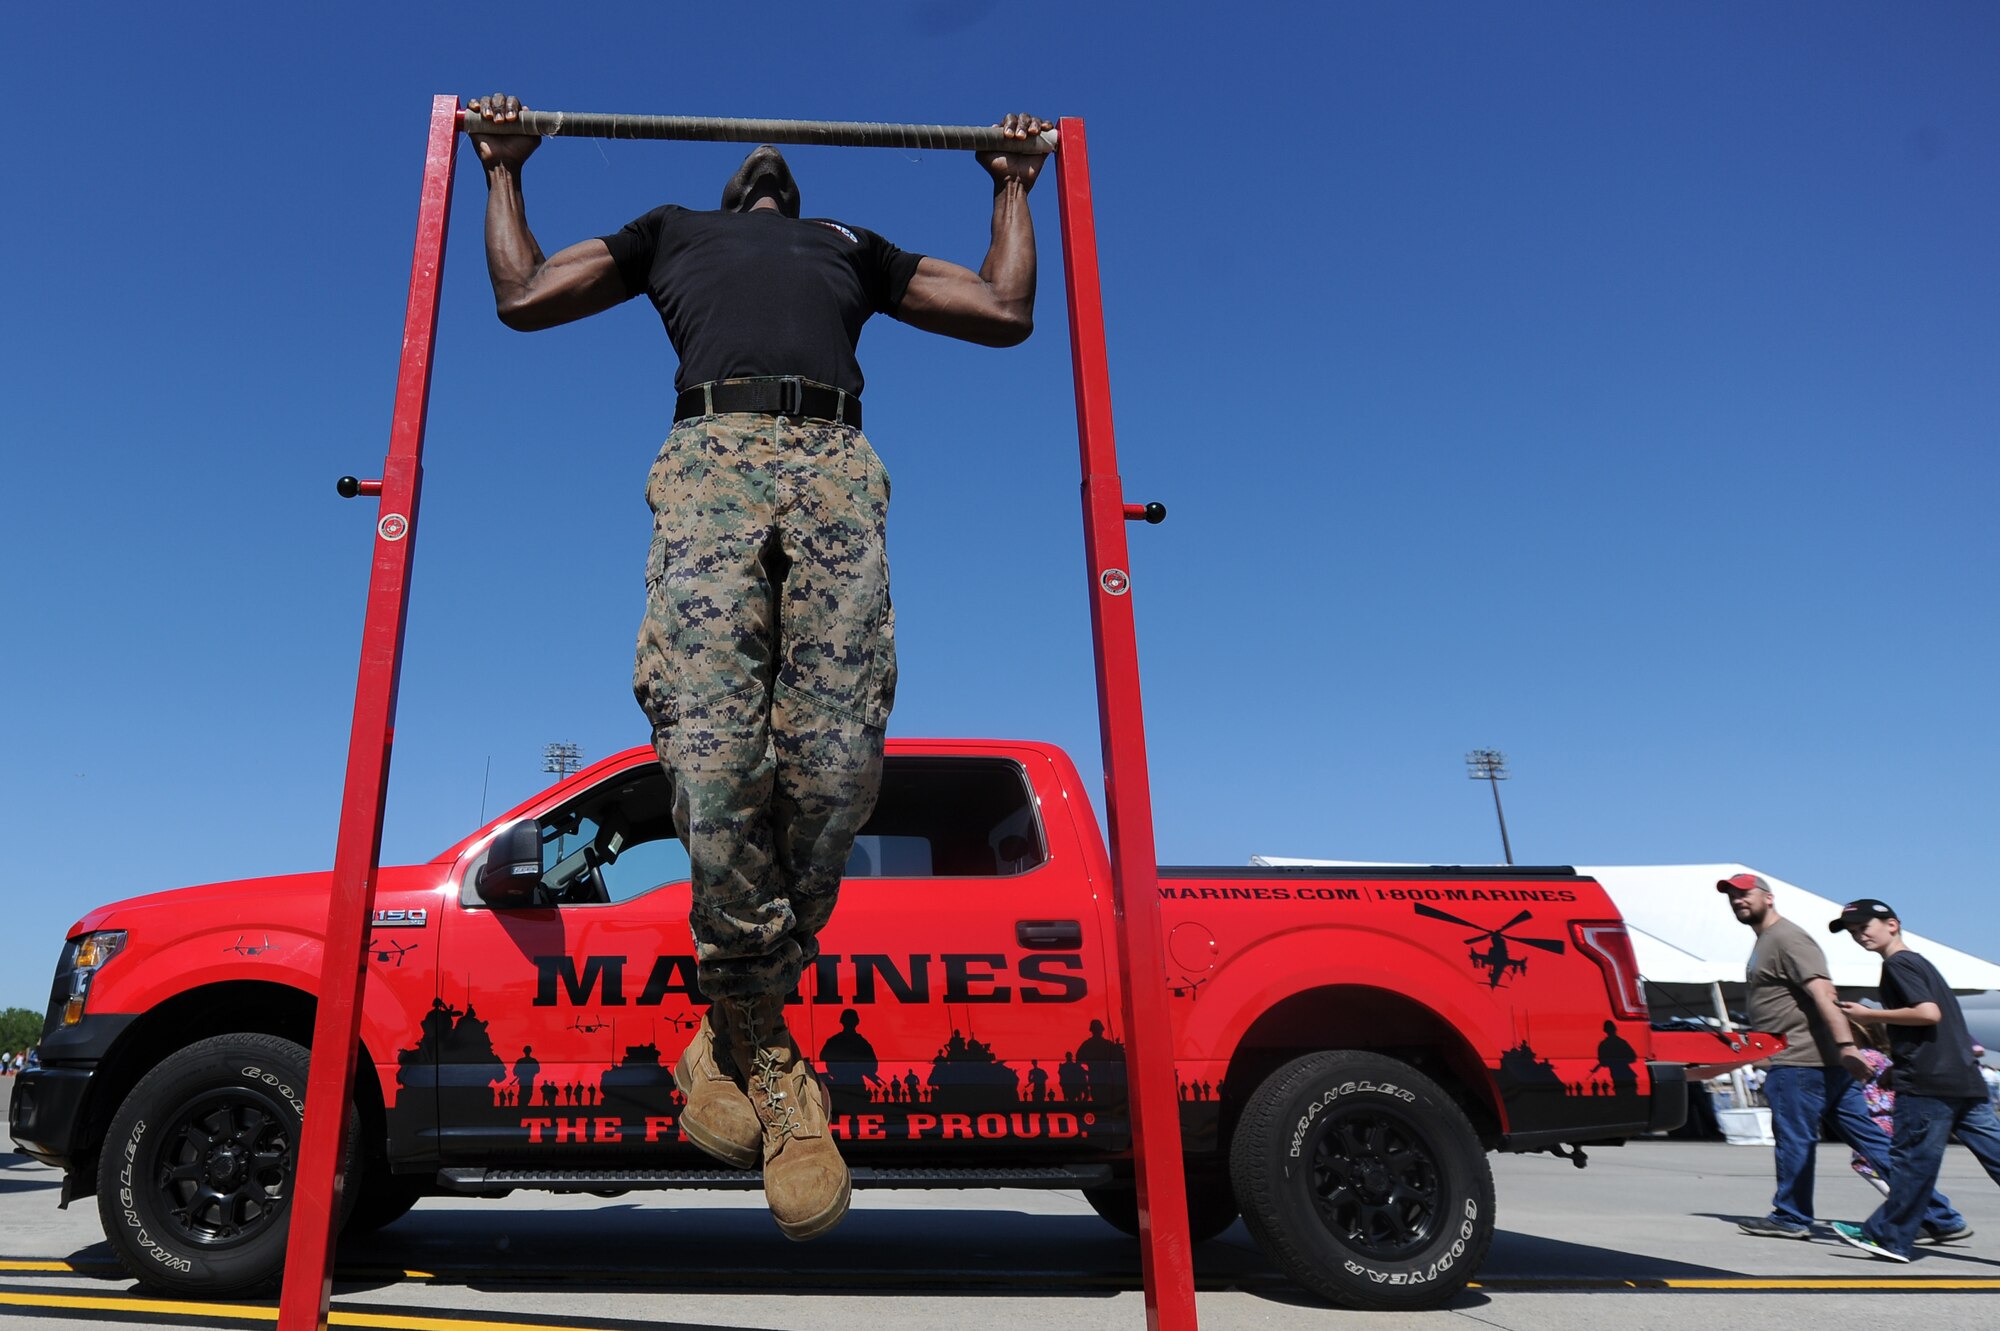 U.S. Marine Corps Sgt. Tony Pressley, Recruiter, performs pull-ups during the Air and Space Expo April 28, 2018, at Joint Base Charleston, S.C. The 2018 Air and Space offered more than 50 demonstrations and displays ranging from Science, Technology, Engineering and Mathematics activities to World War II static display aircraft and aerial demonstration performances highlighting the F-16 Fighting Falcon, C-17 Globemaster III, F-86 Sabre and more. The AeroShell Aerobatics Team headlined the event, wrapping up the full-day show.